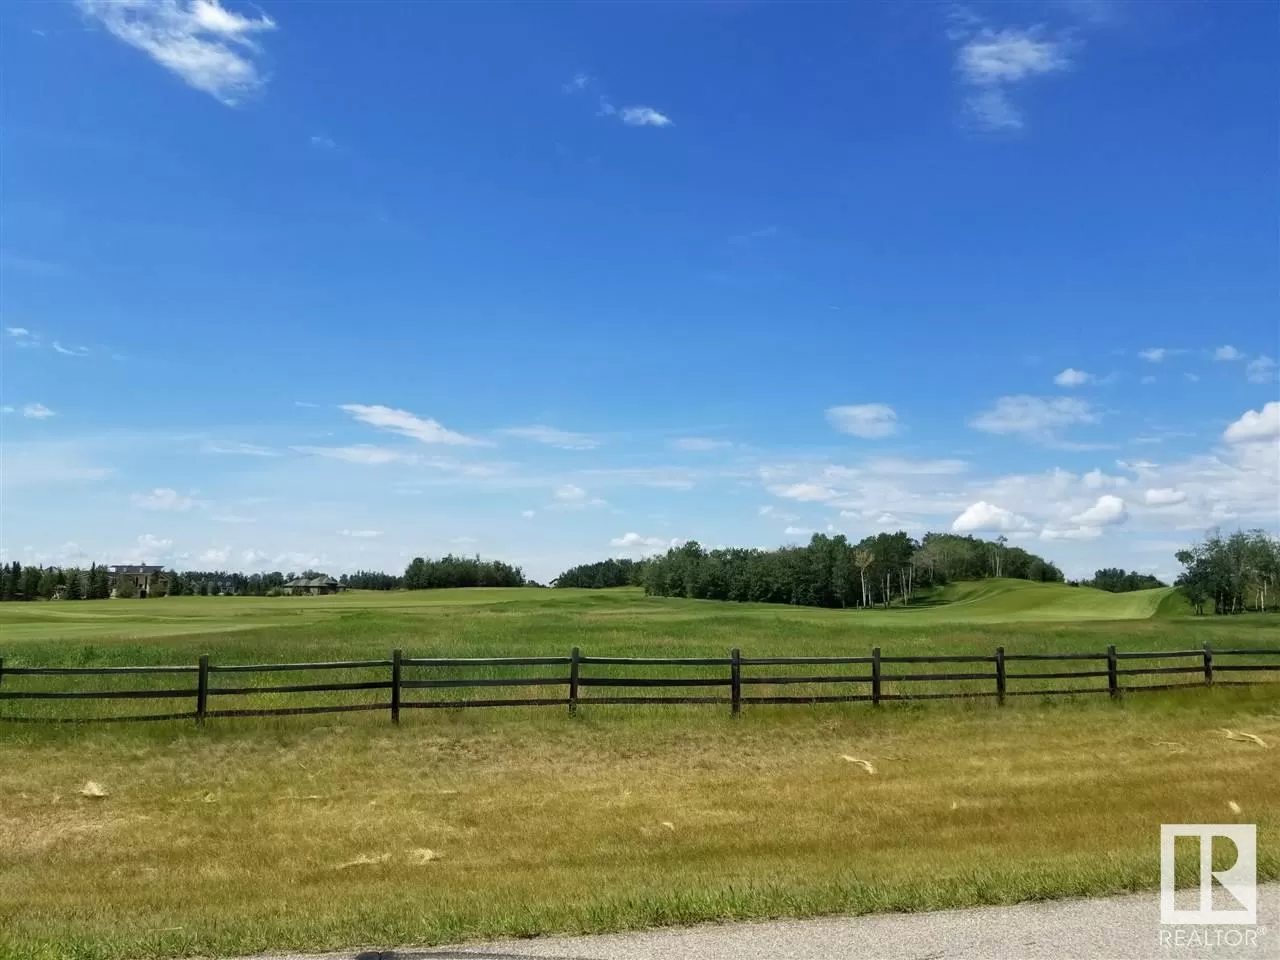 No Building for rent: 71 25527 Twp Rd 511a, Rural Parkland County, Alberta T7Y 1B8